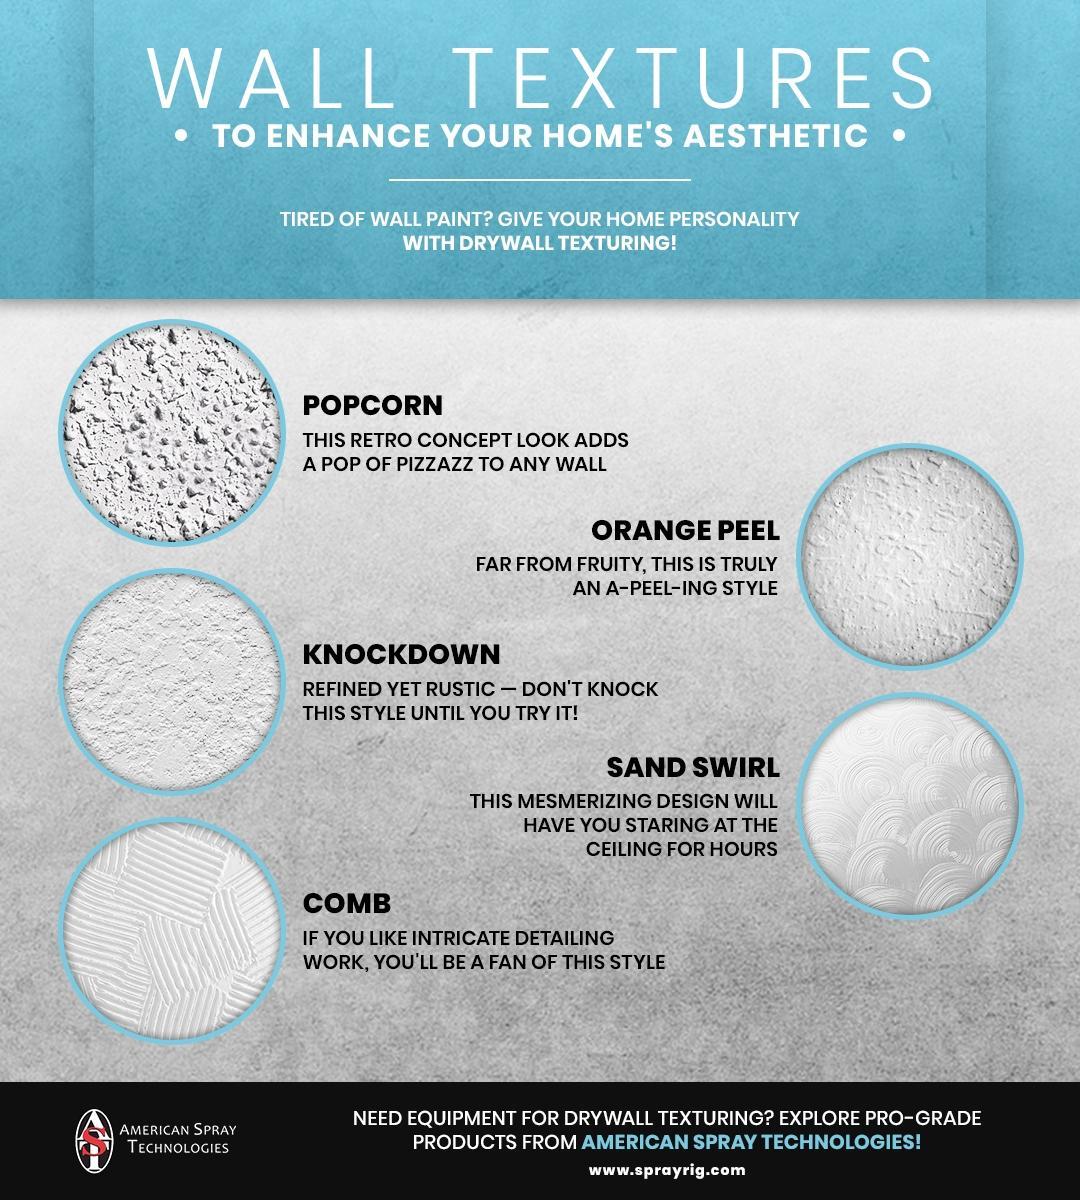 Wall Textures To Enhance Your Home's Aesthetic Infographic